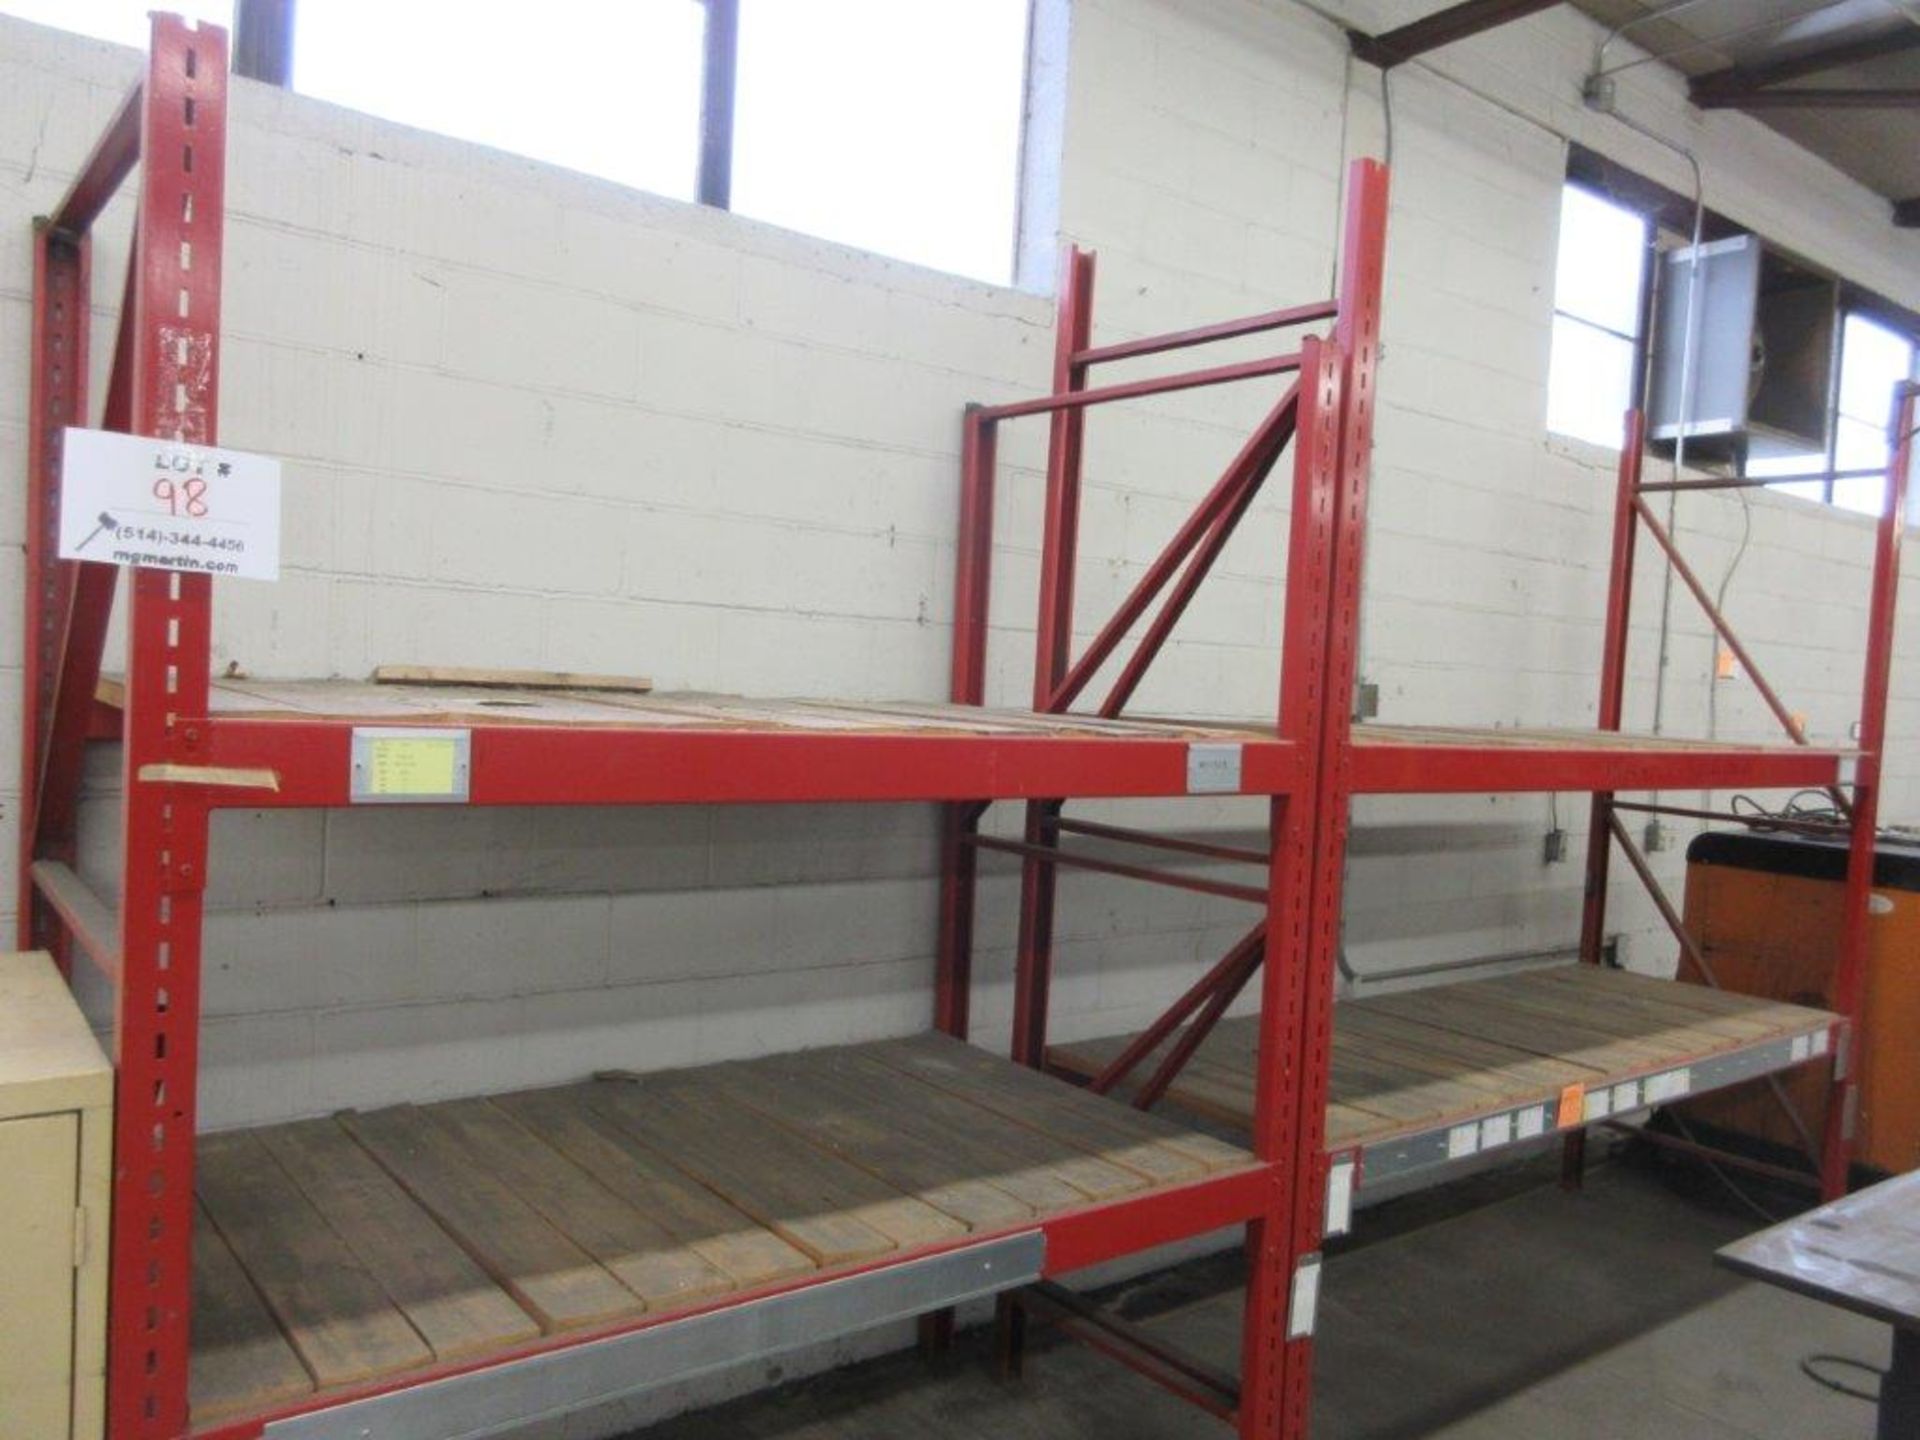 Sections industrial racking 79w x 41d x 8ft h / 105w x 34d x 9ft h/ 127w x 36d x 8ft h / 127w x